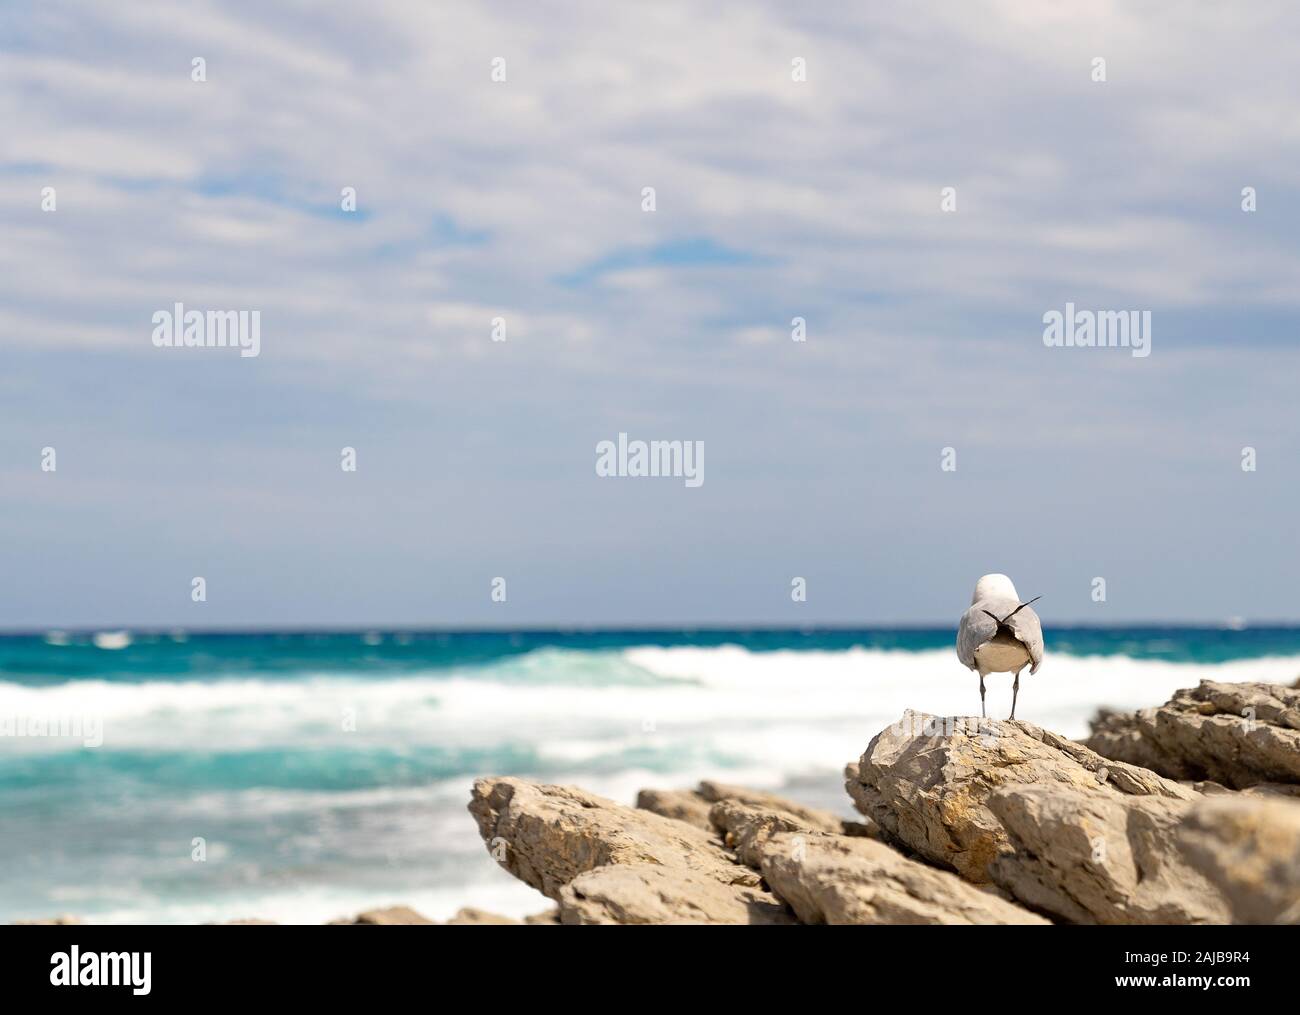 Seagull on cliff watching the sea Stock Photo